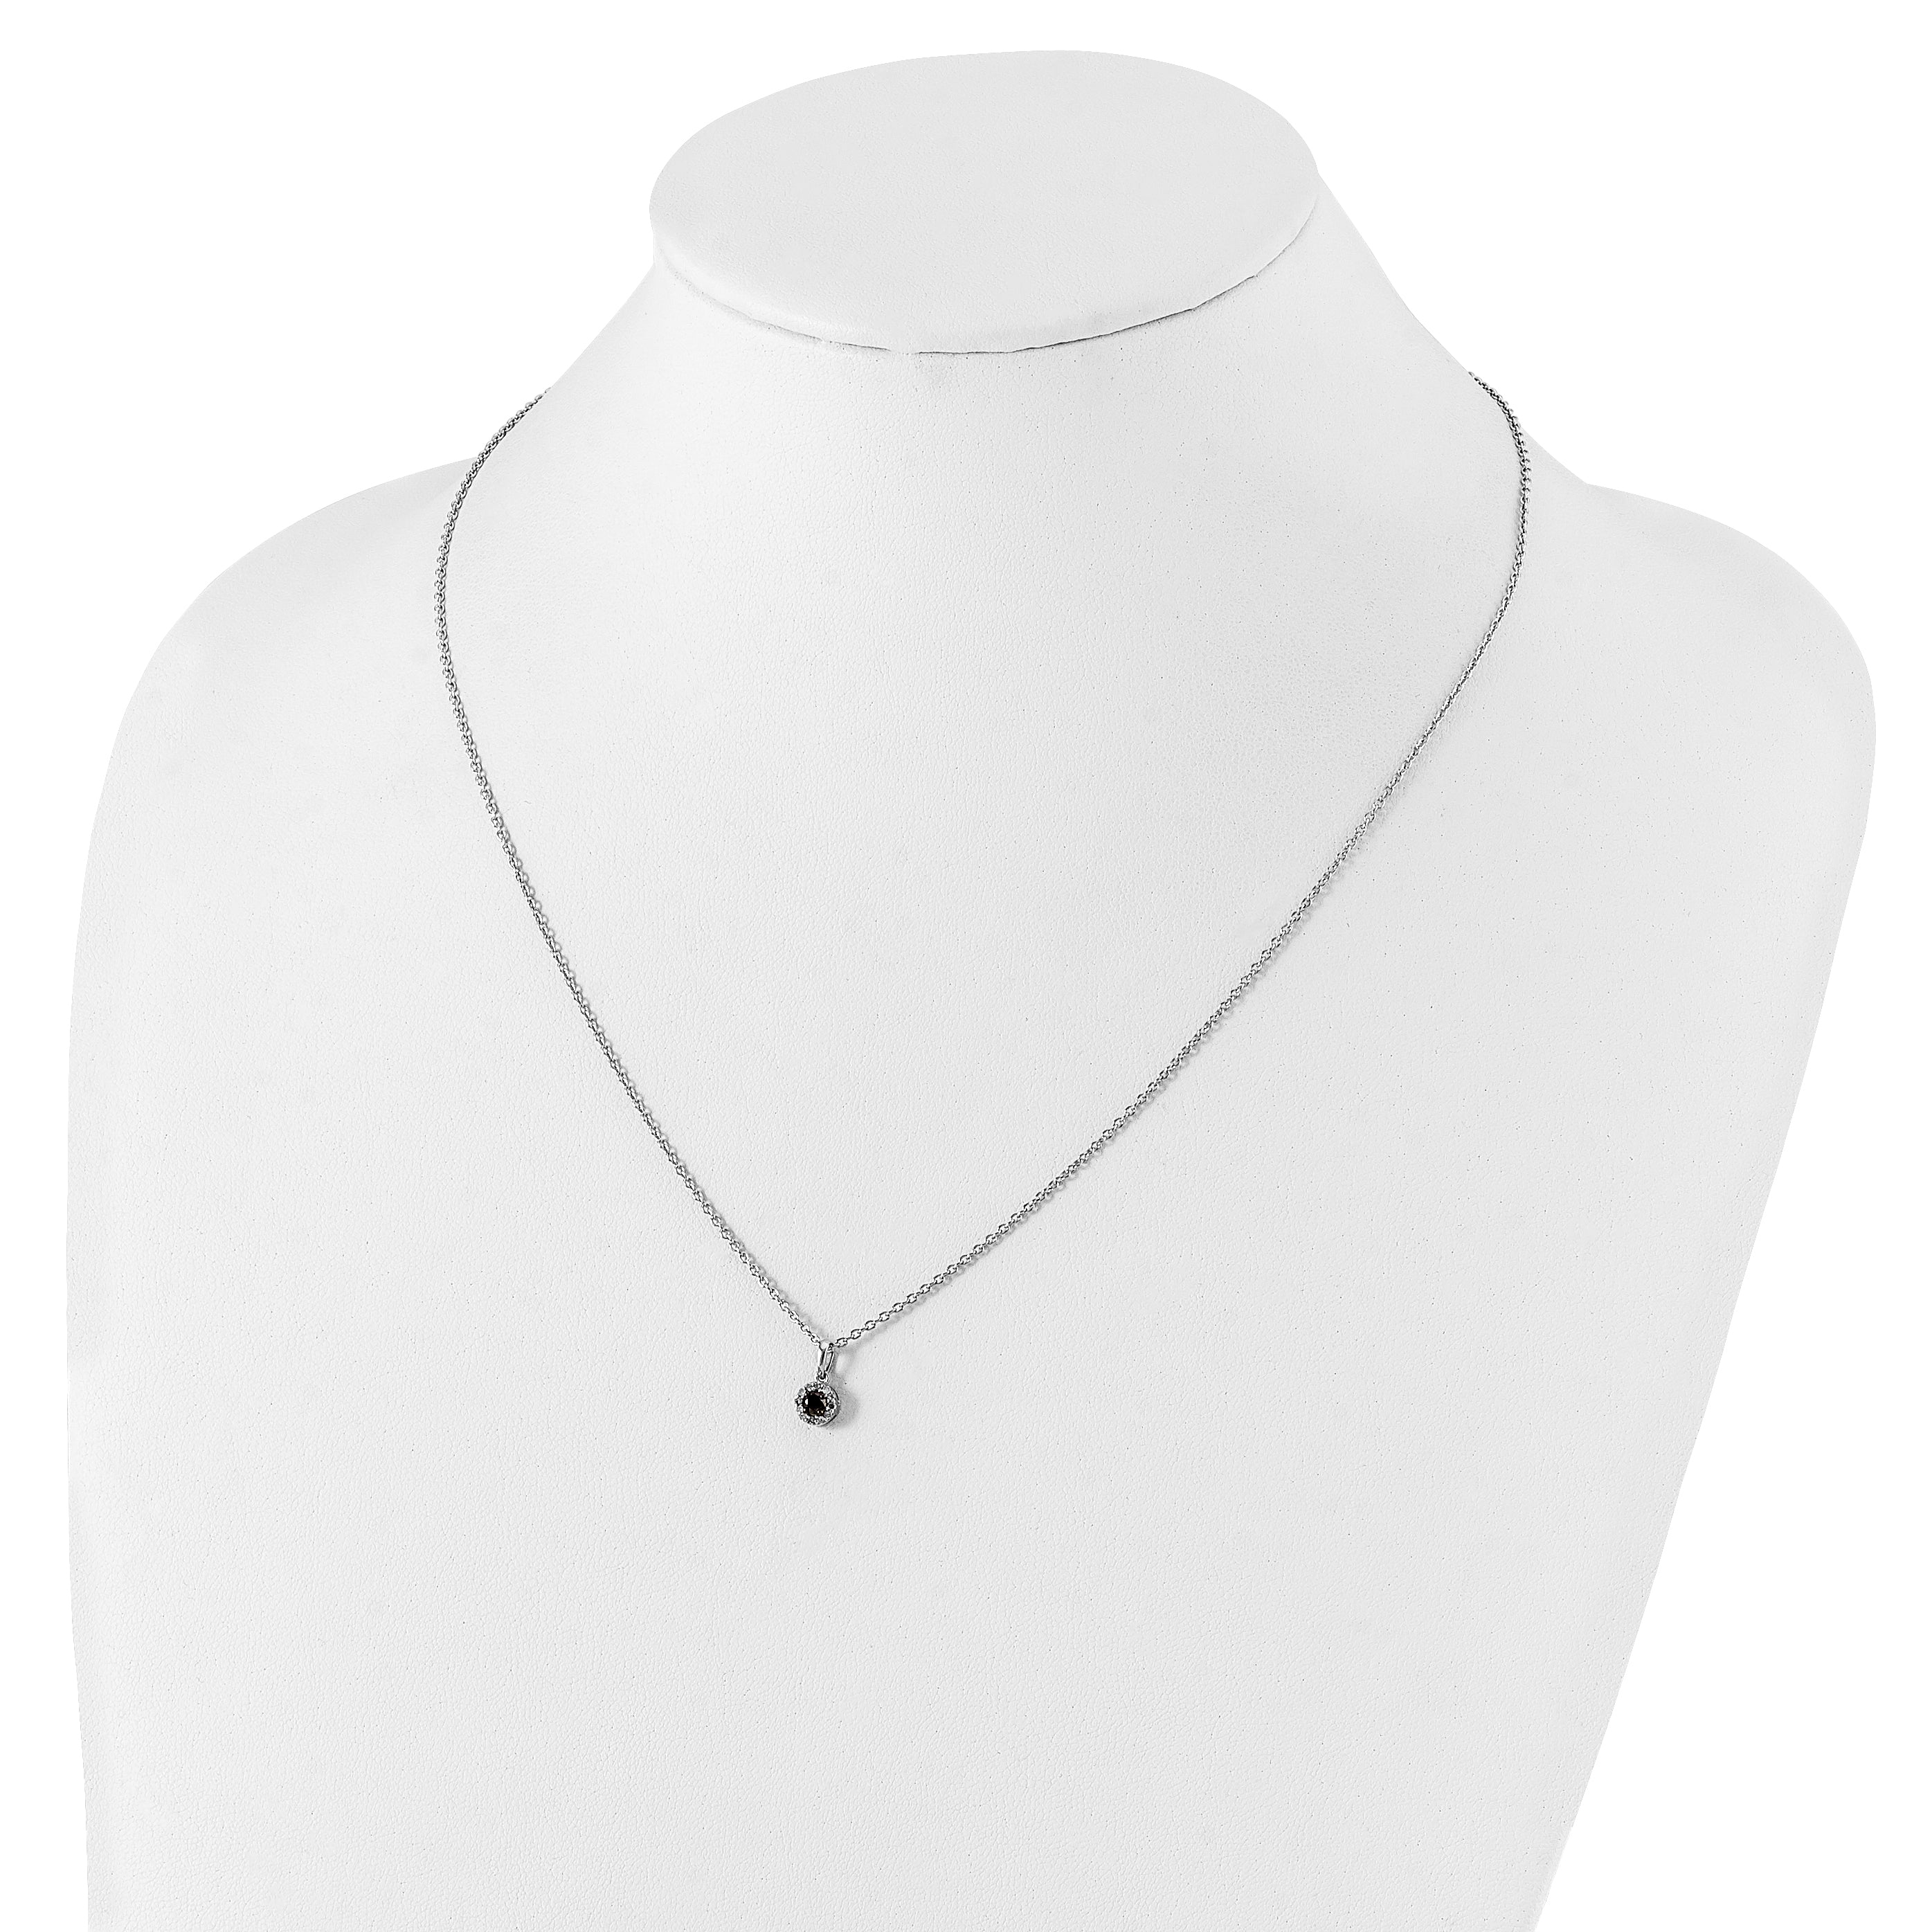 White Night Sterling Silver Rhodium-plated Black and White Diamond Circle Pendant 18 Inch Necklace with 2 Inch Extender